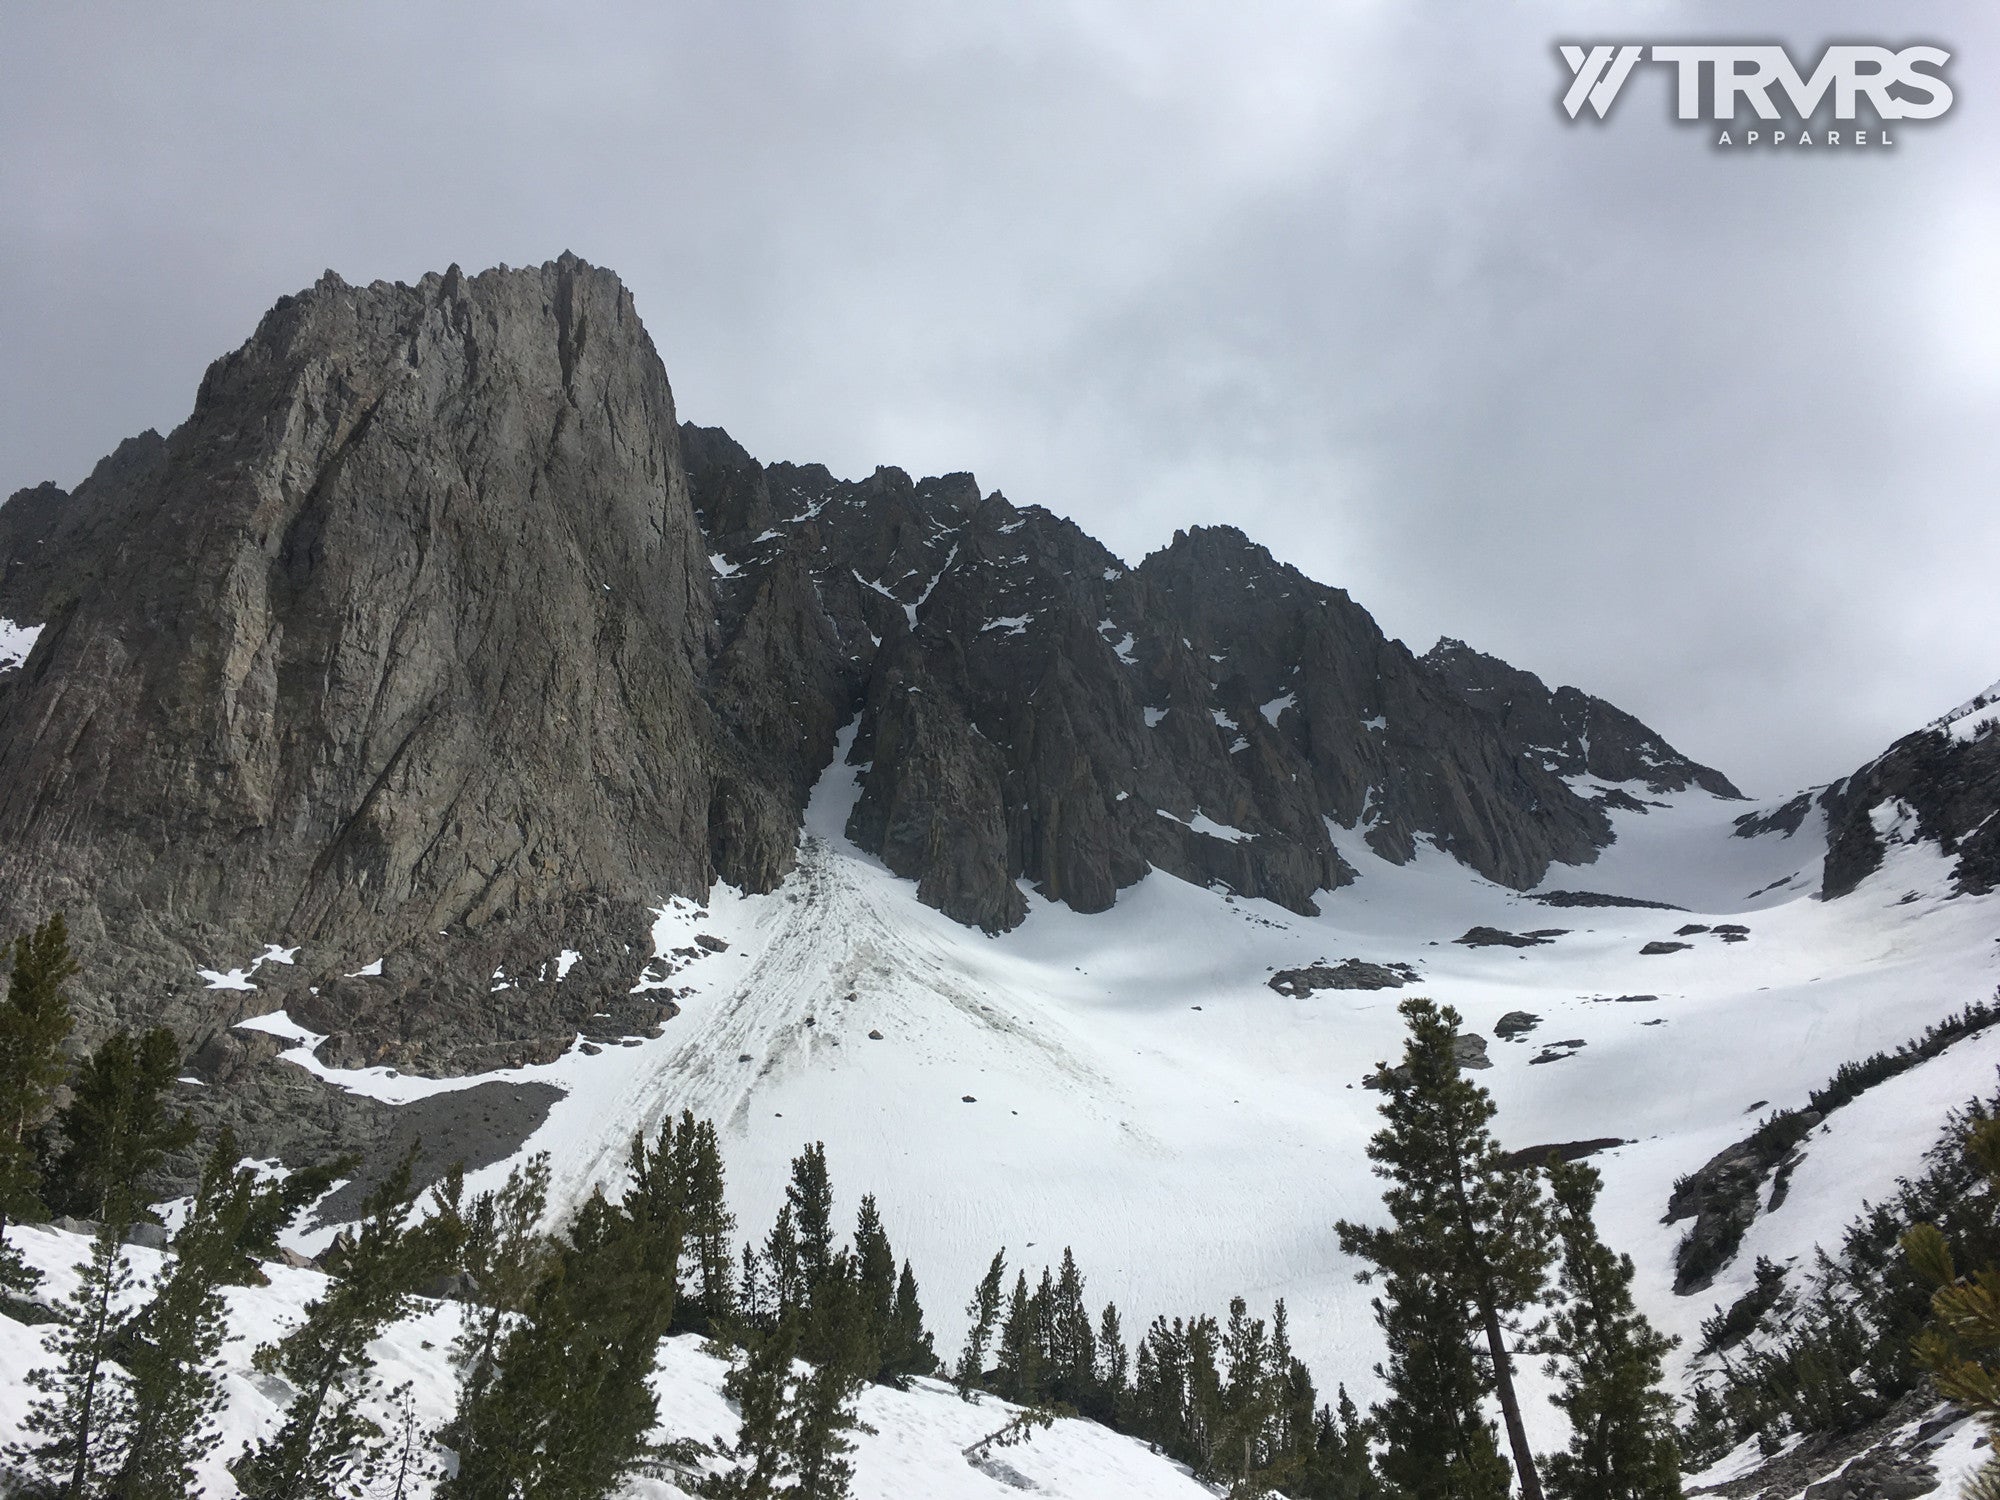 Snowy Slope Below Temple Crag from Third Lake | TRVRS APPAREL